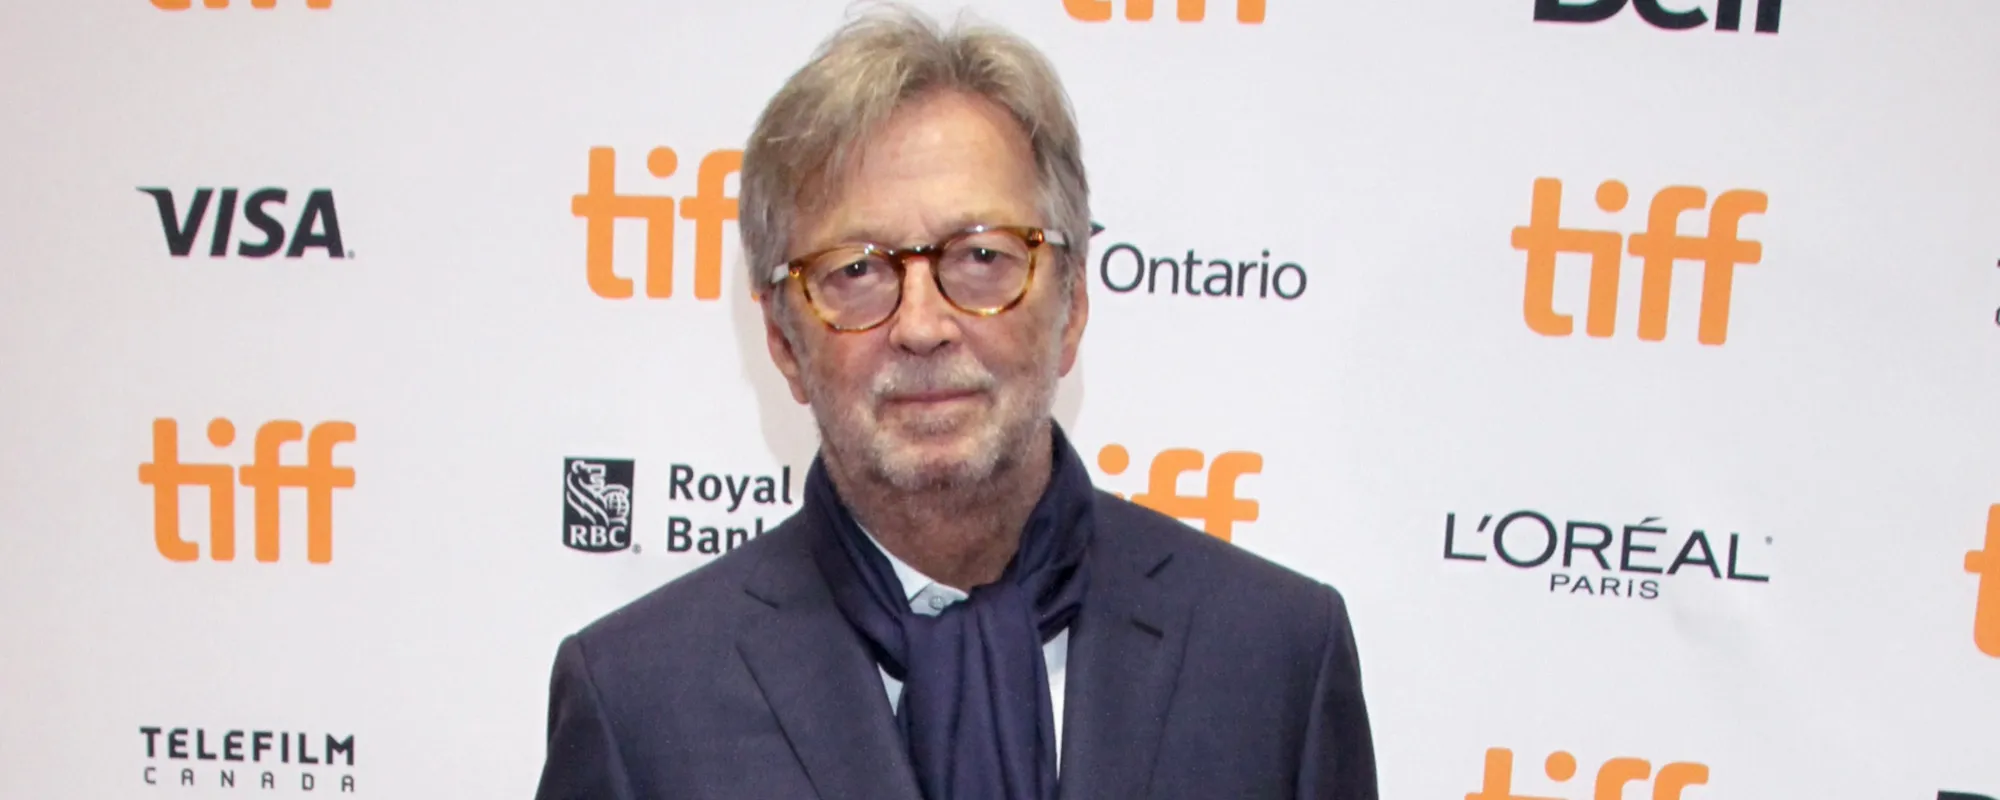 Eric Clapton: People Vaccinated Against COVID-19 Under “Hypnosis”